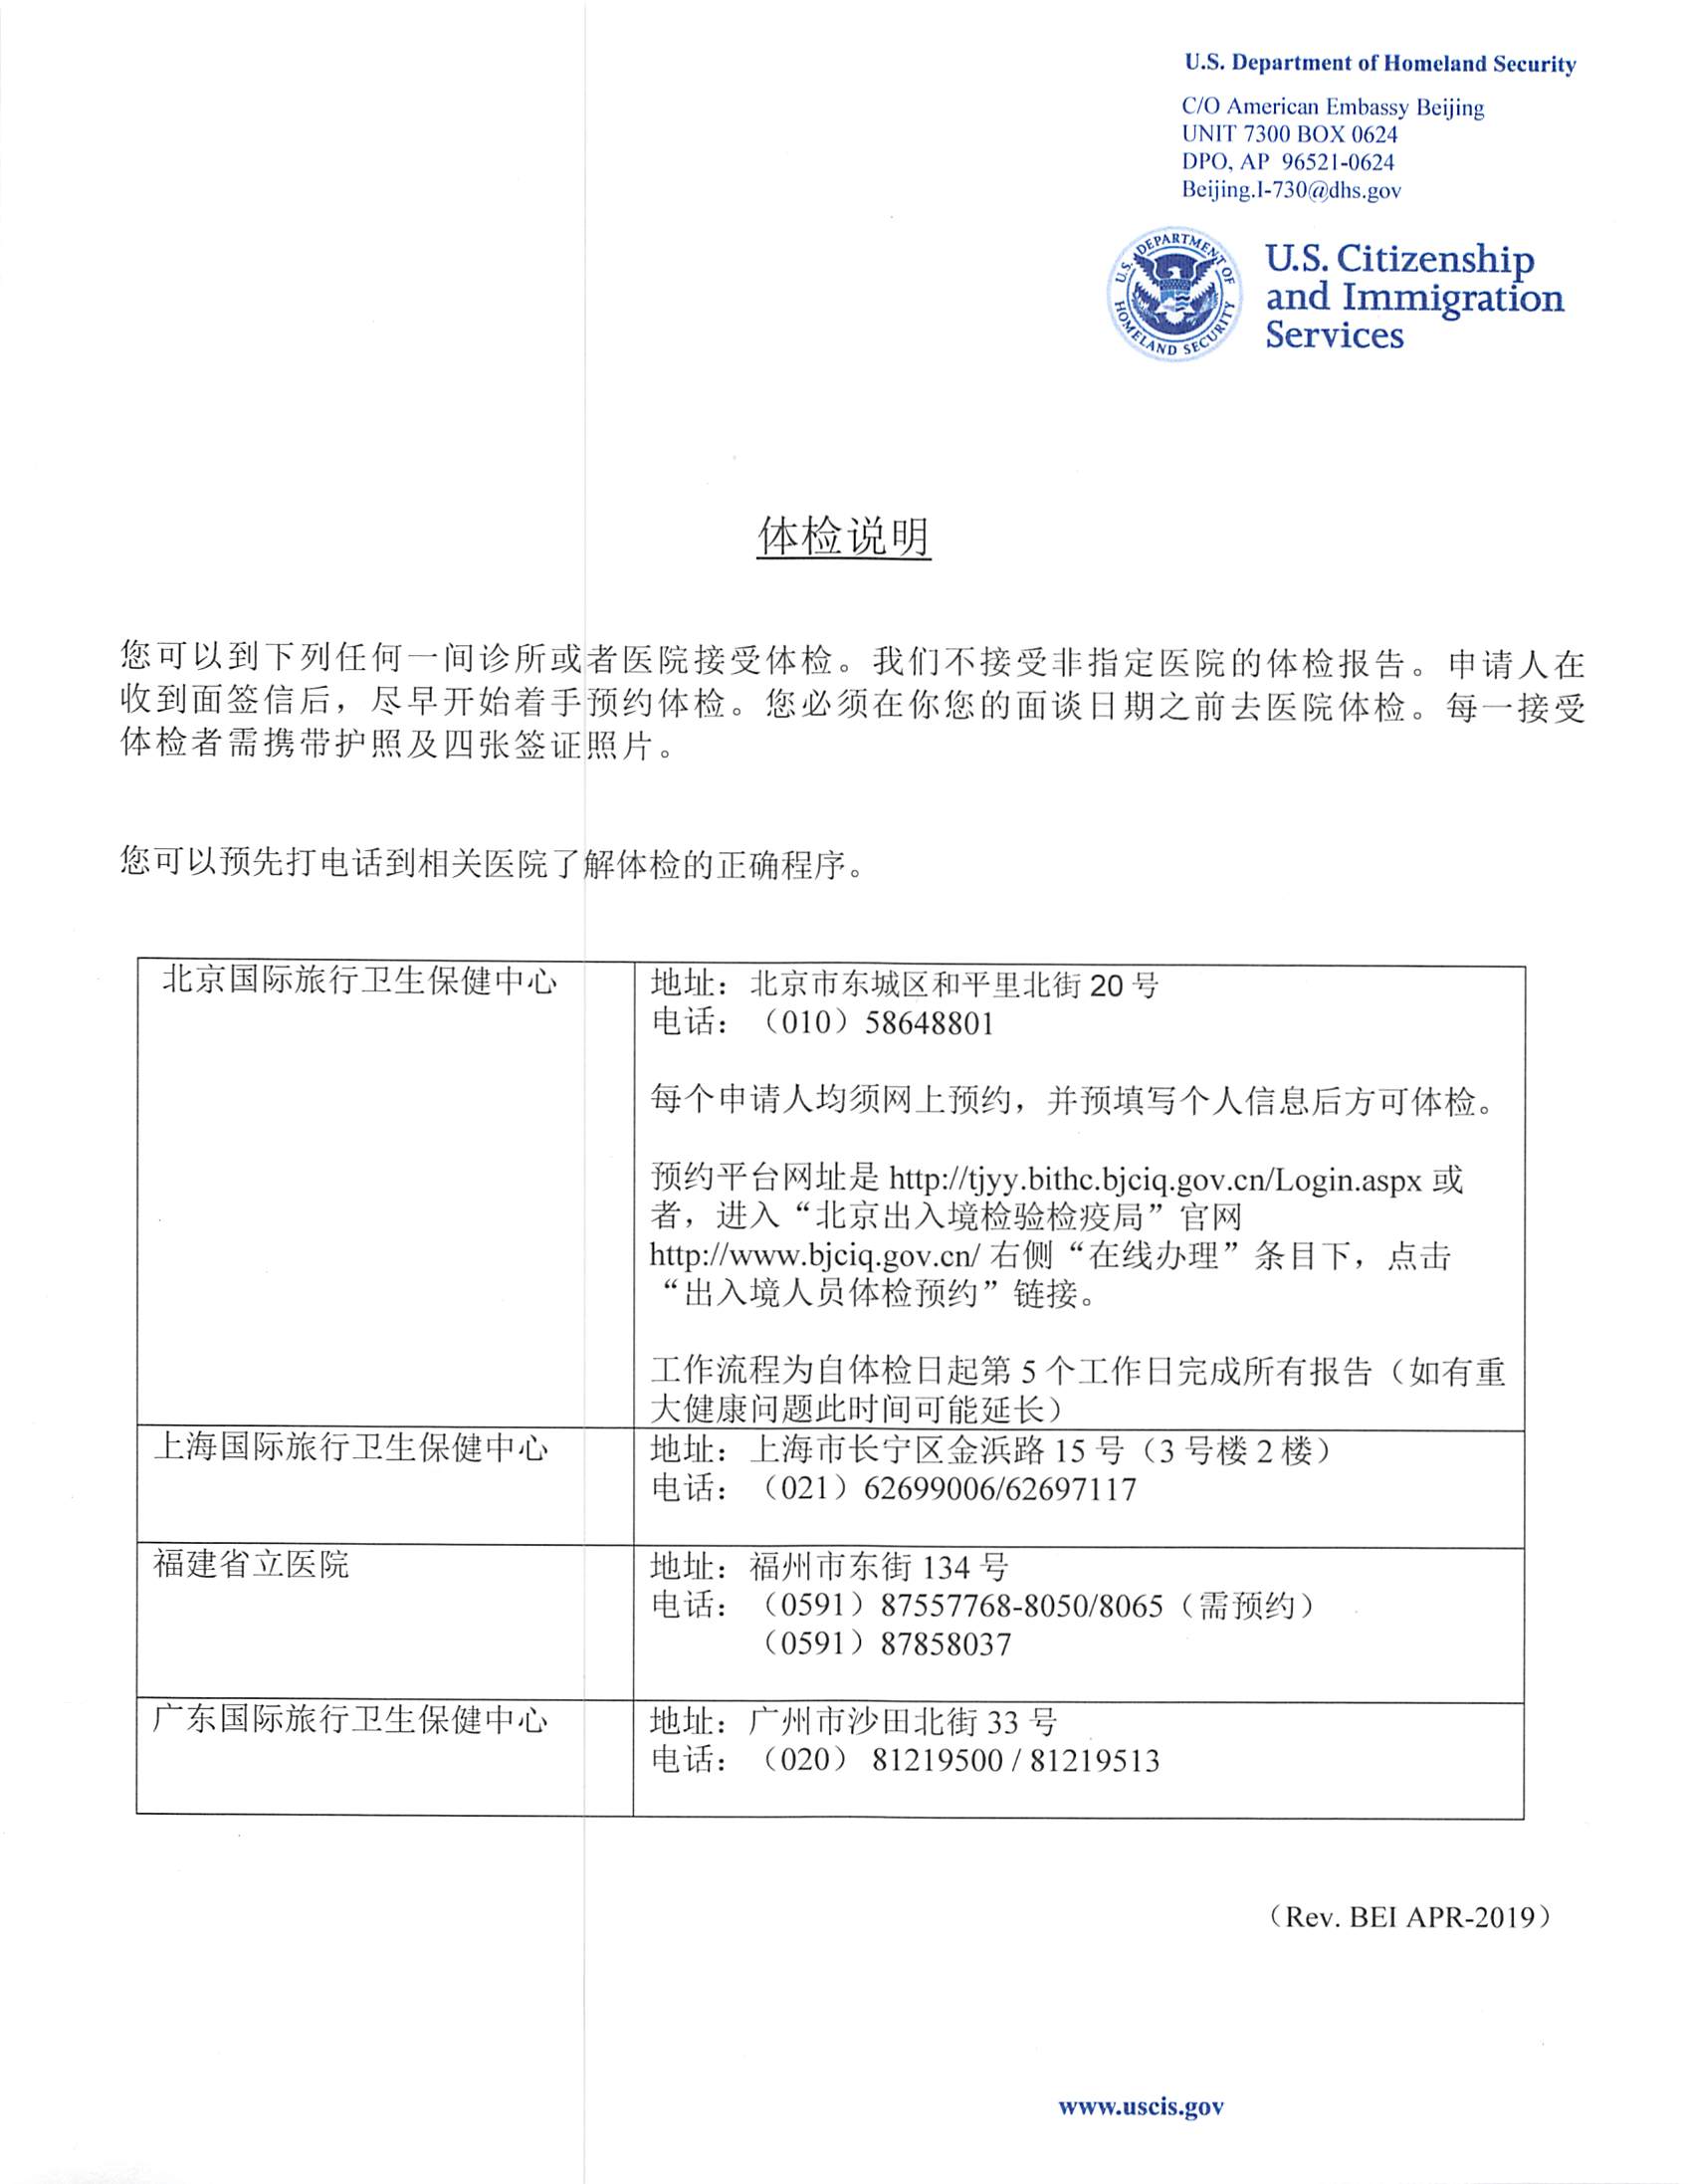 COVID-19 interview packet_页面_05.jpg